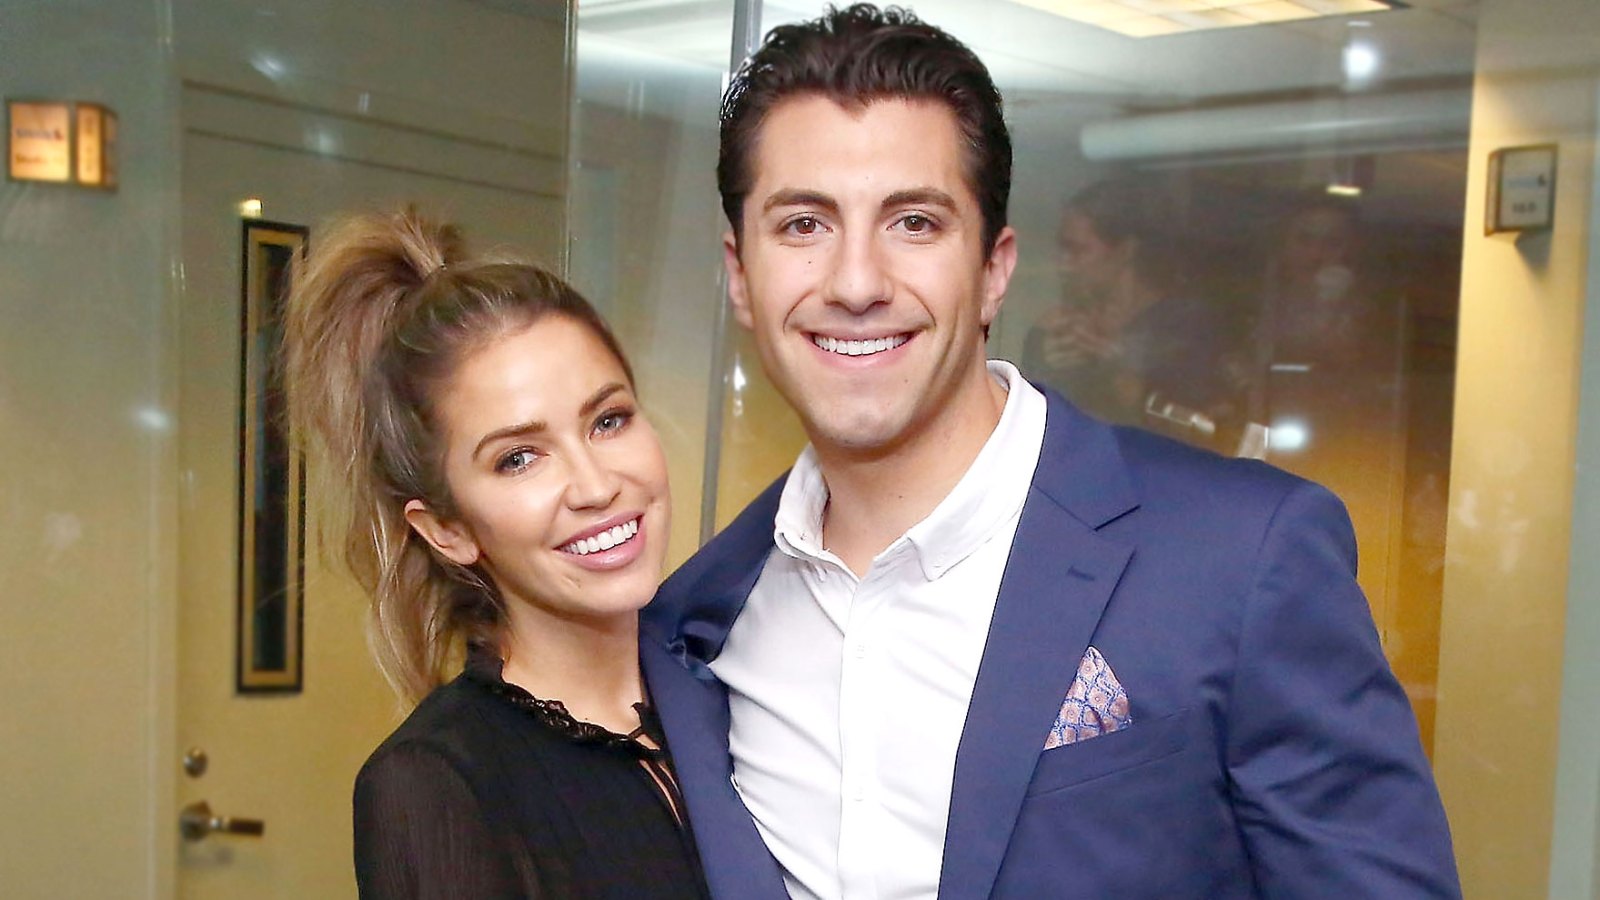 Kaitlyn Bristowe and Jason Tartick Adopt a Dog From Korea 'My Mom and Dad Call Me Noods'